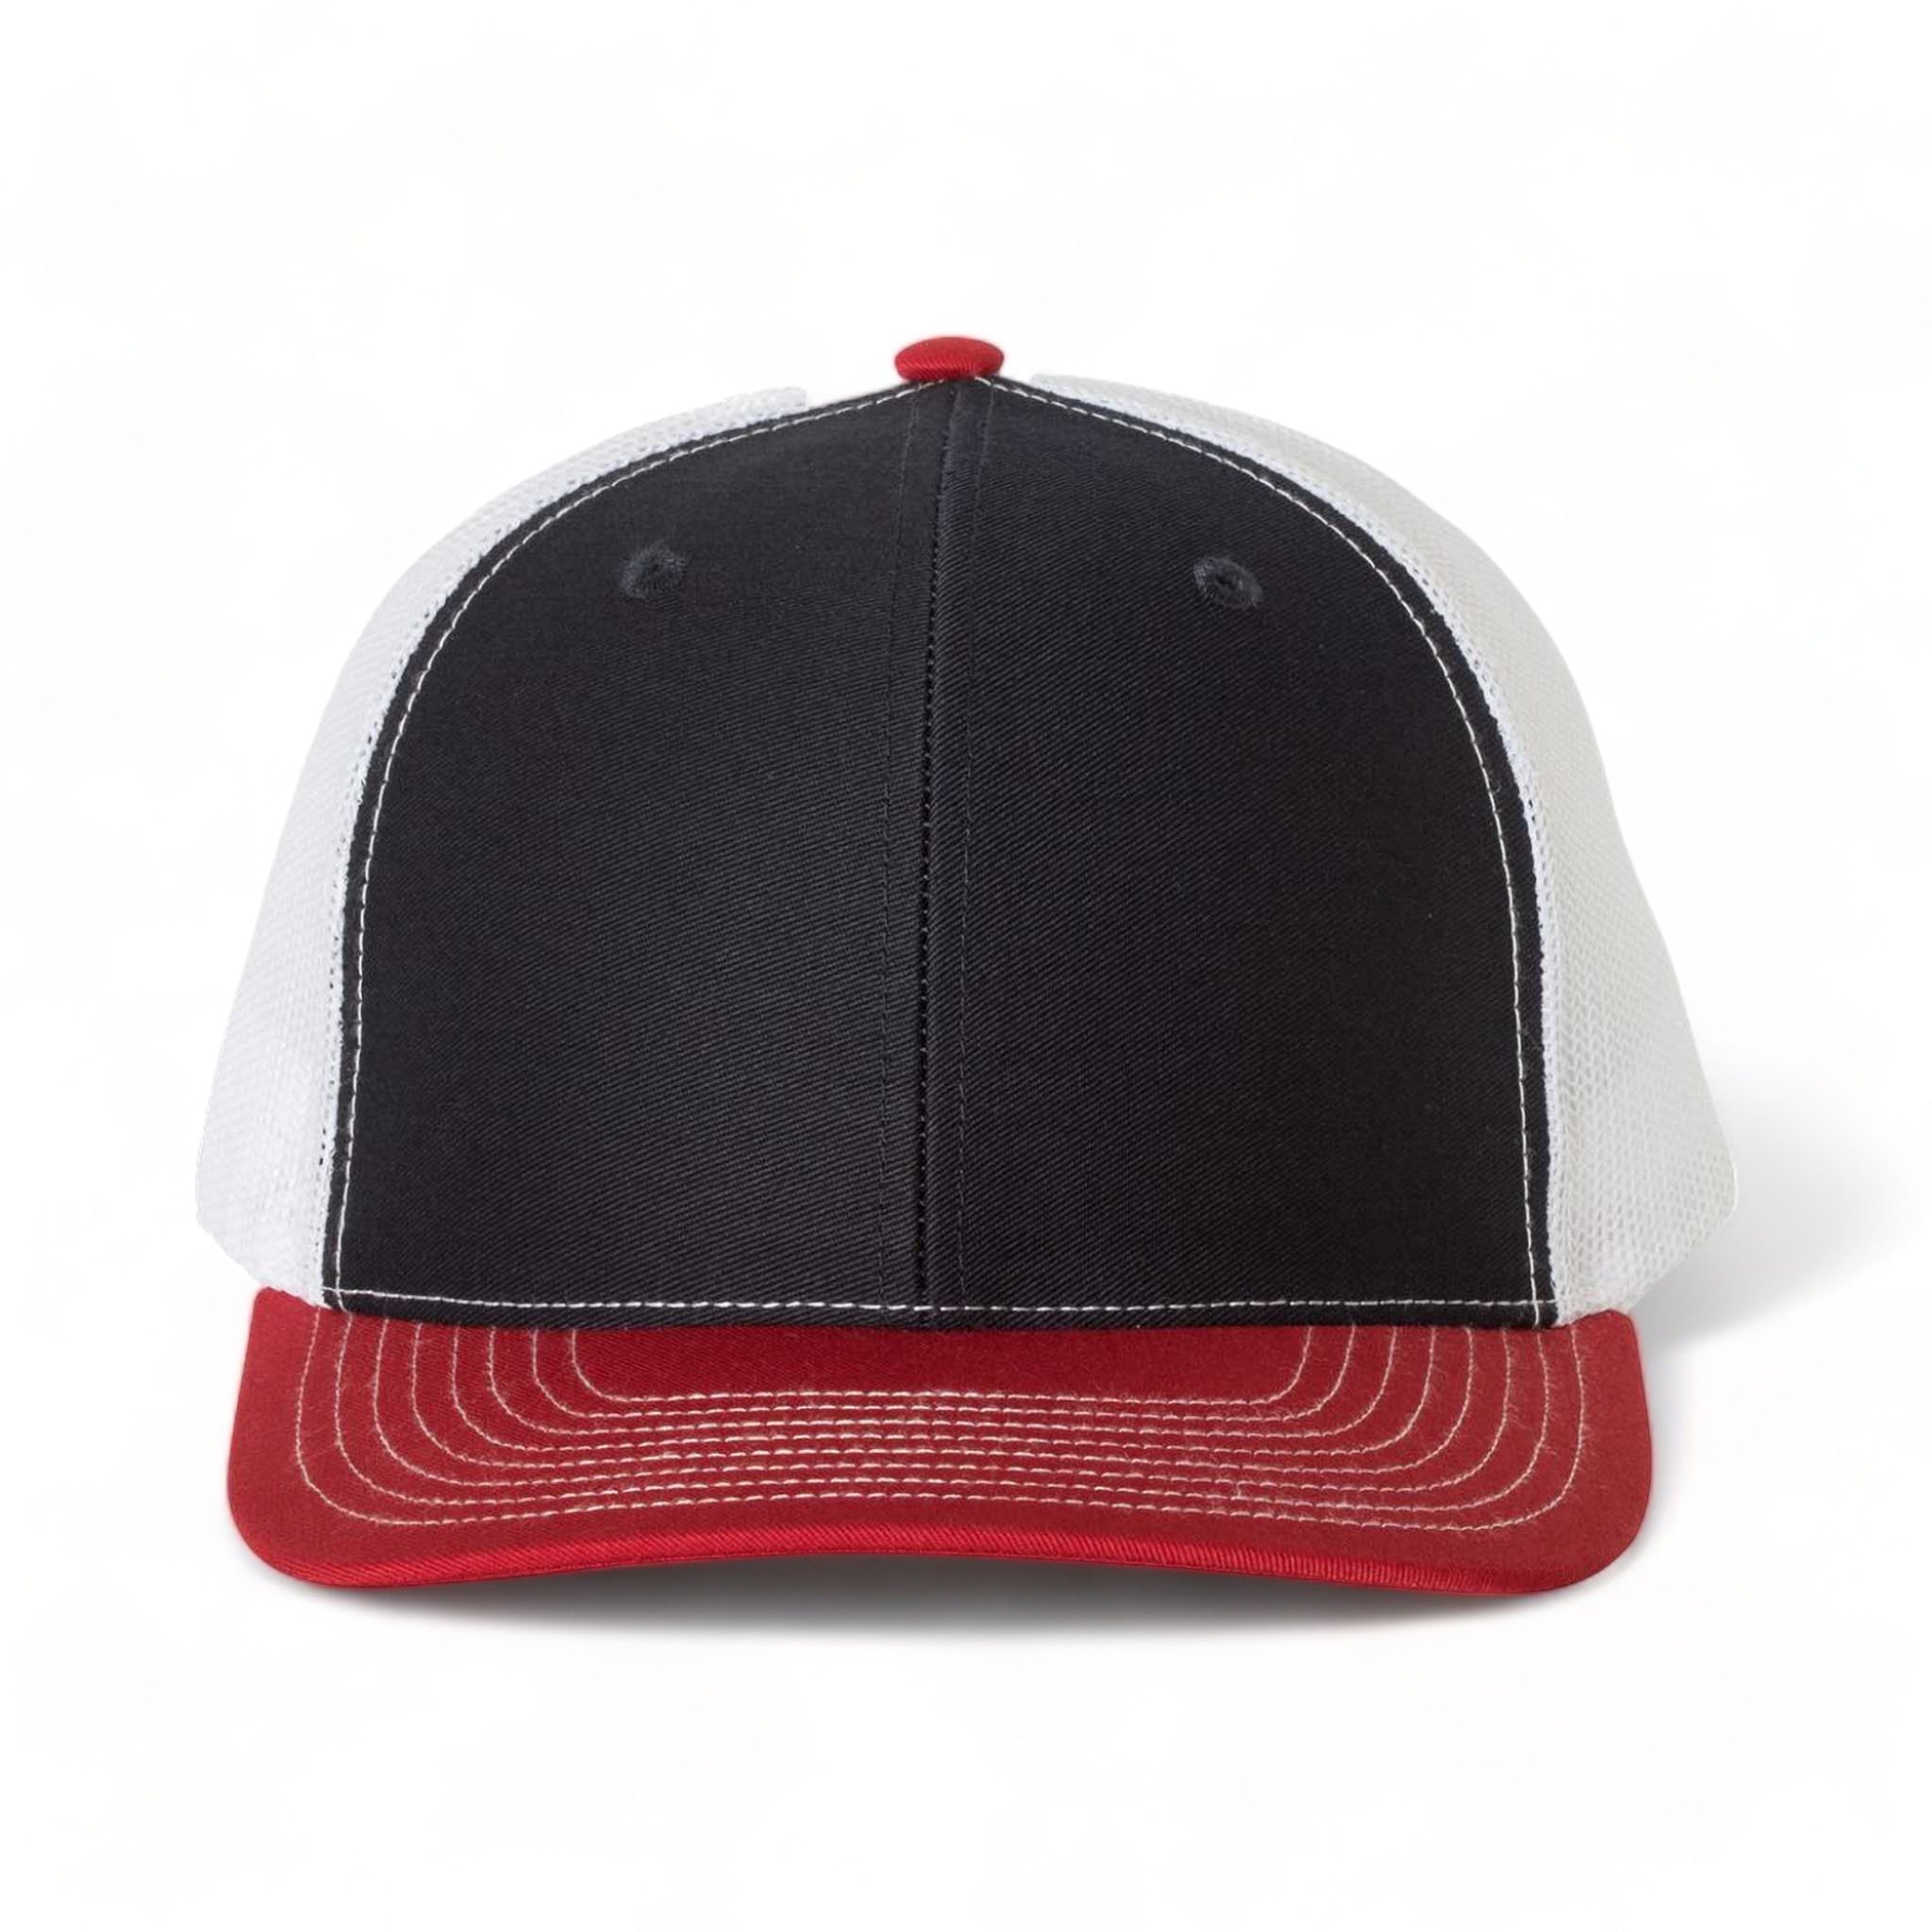 Front view of Richardson 112 custom hat in navy, white and red